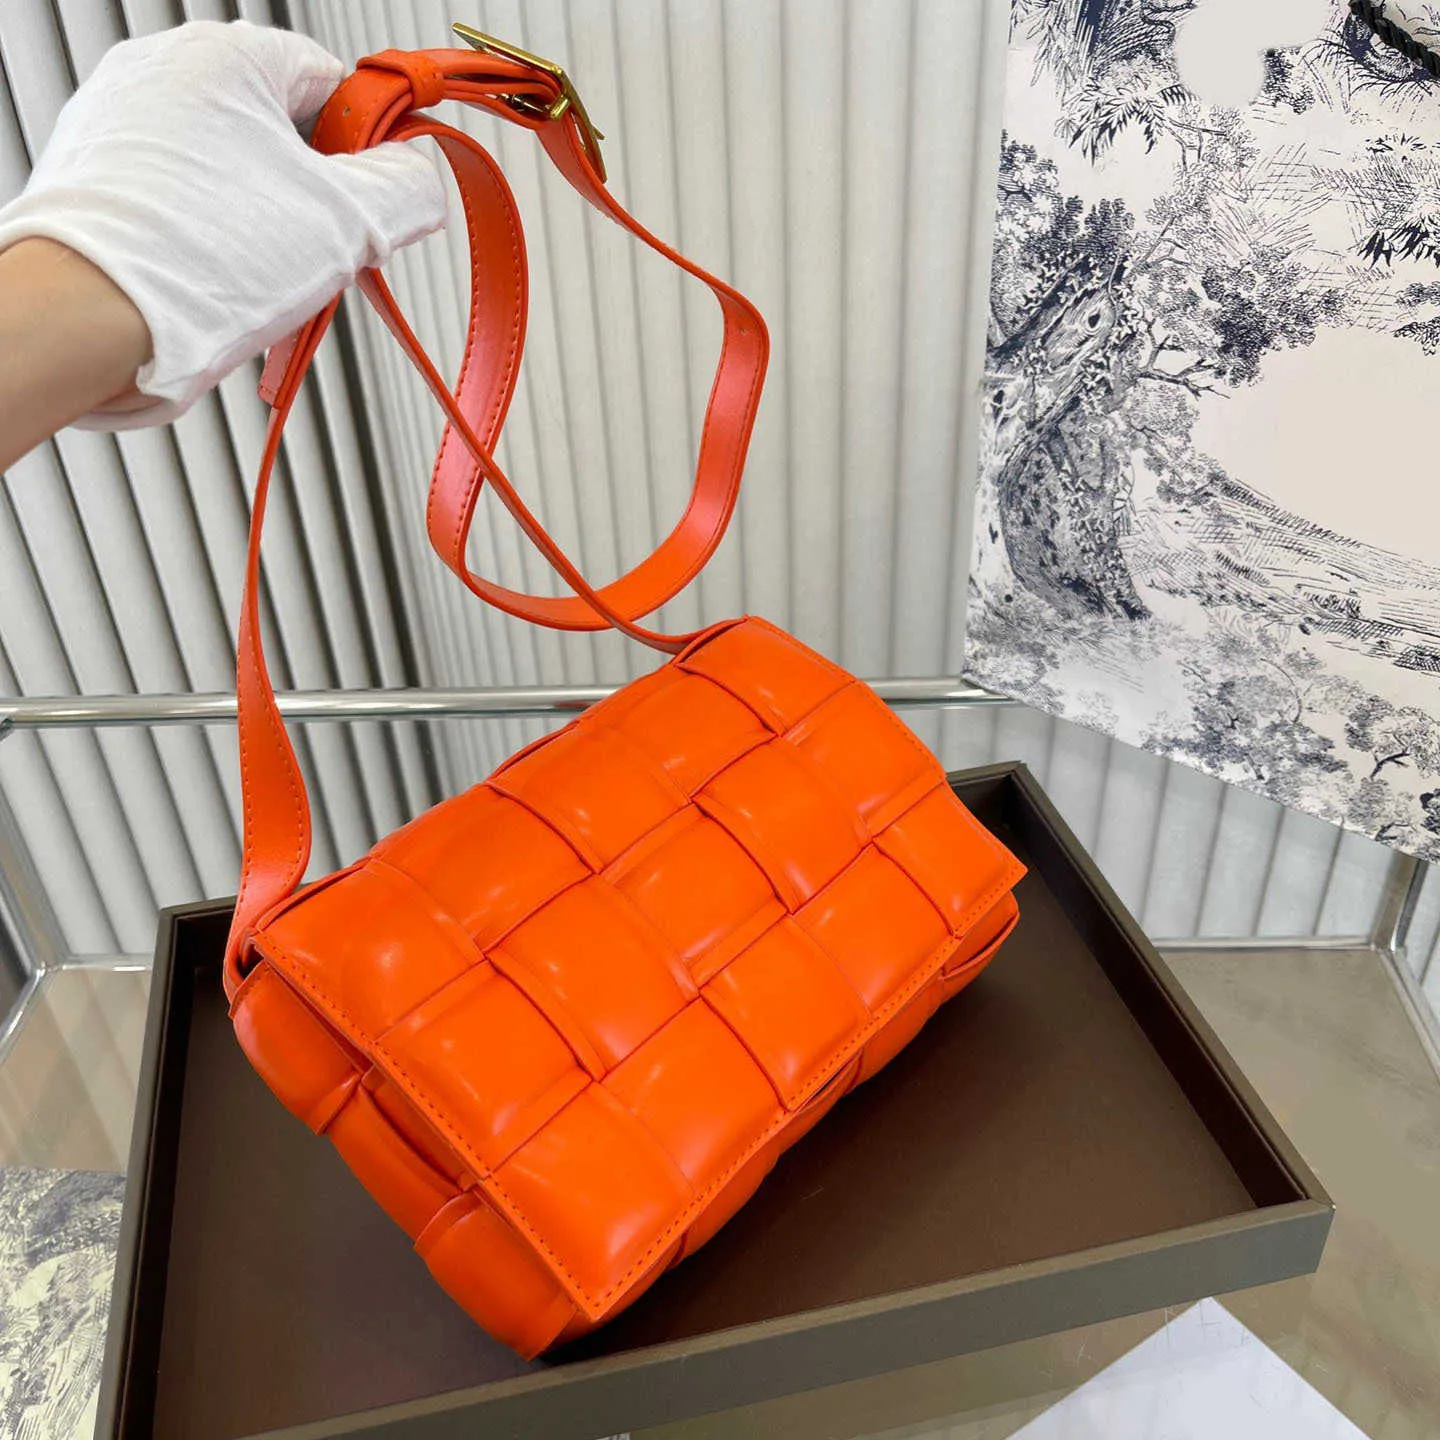 The 10 Most Popular Designer Bags Ever | Who What Wear